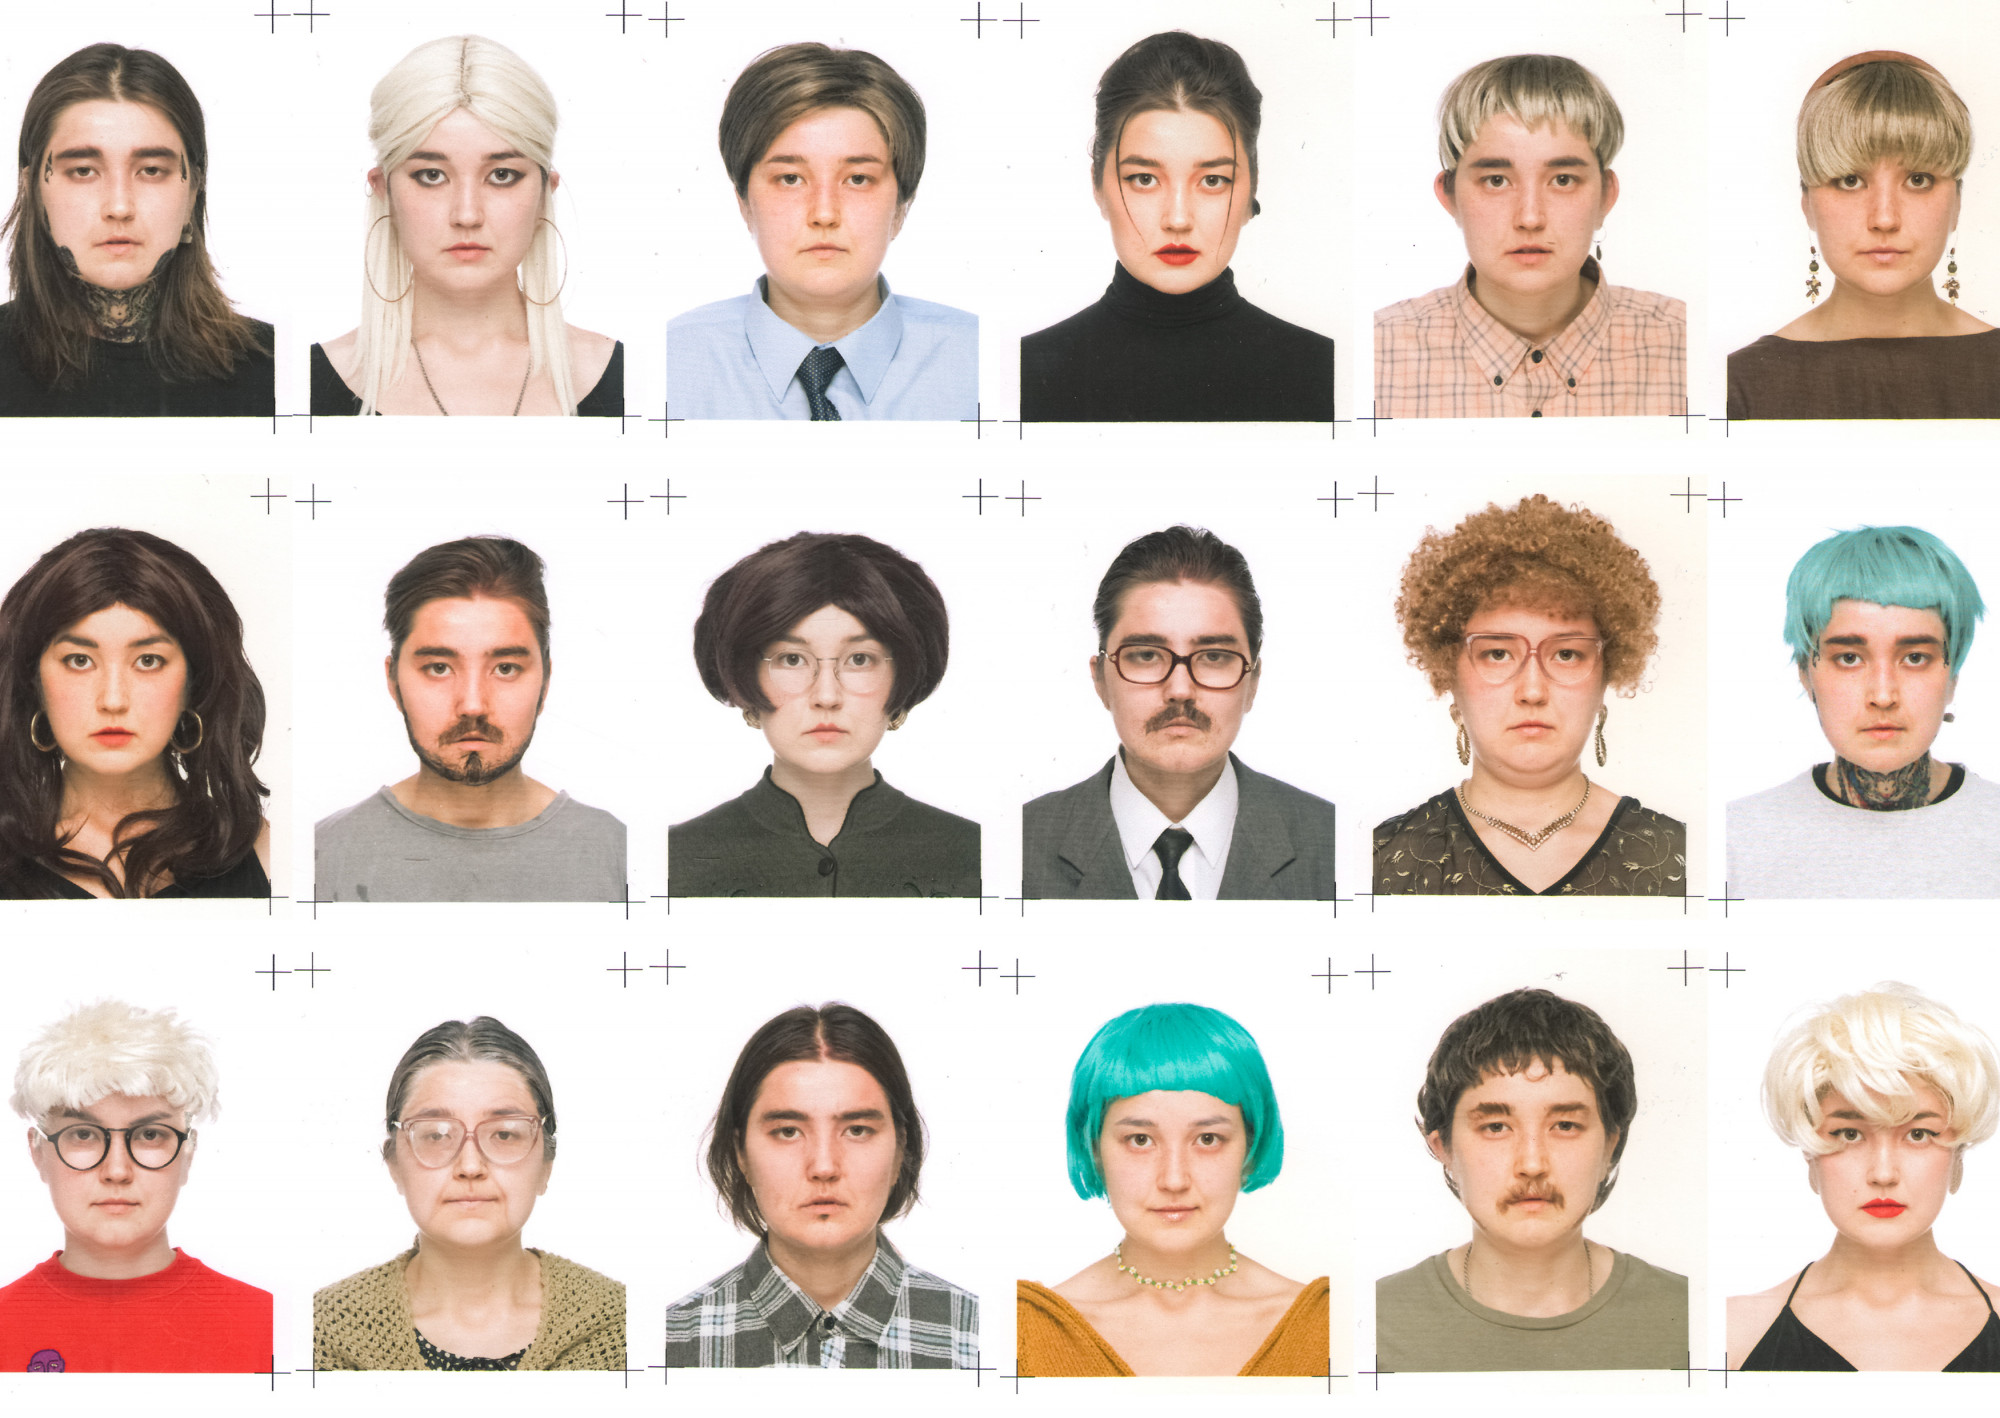 Untitled, 2020. Exploration of the nature of identity through a series of passport photos in costume